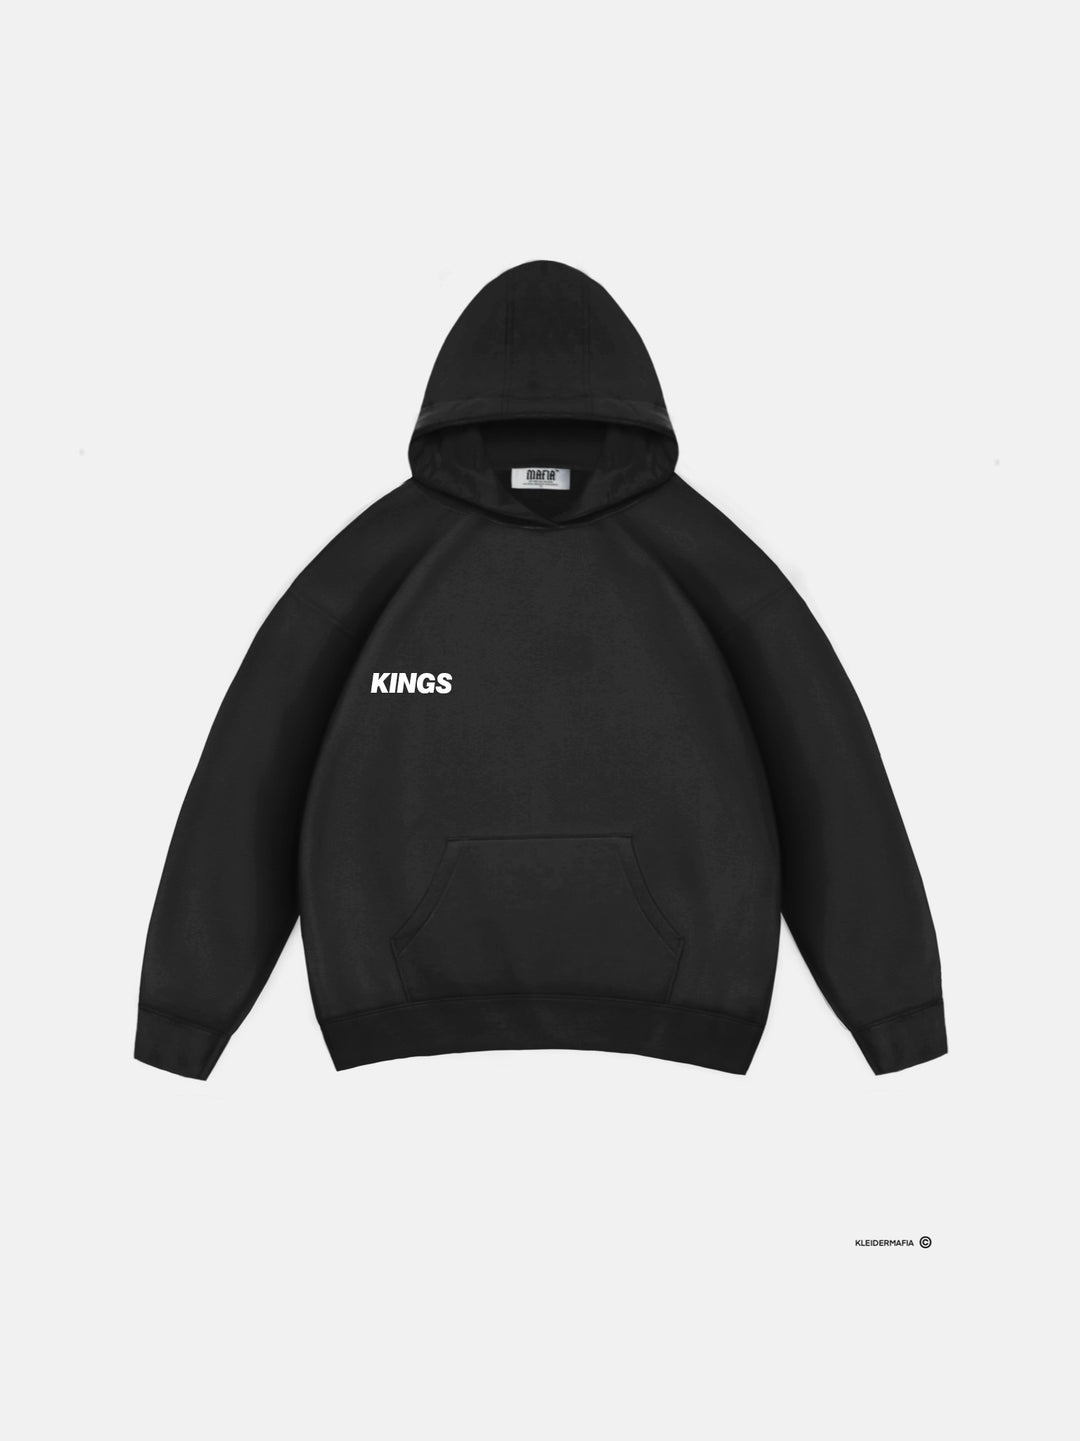 Oversize Kings Hoodie - Black and Red